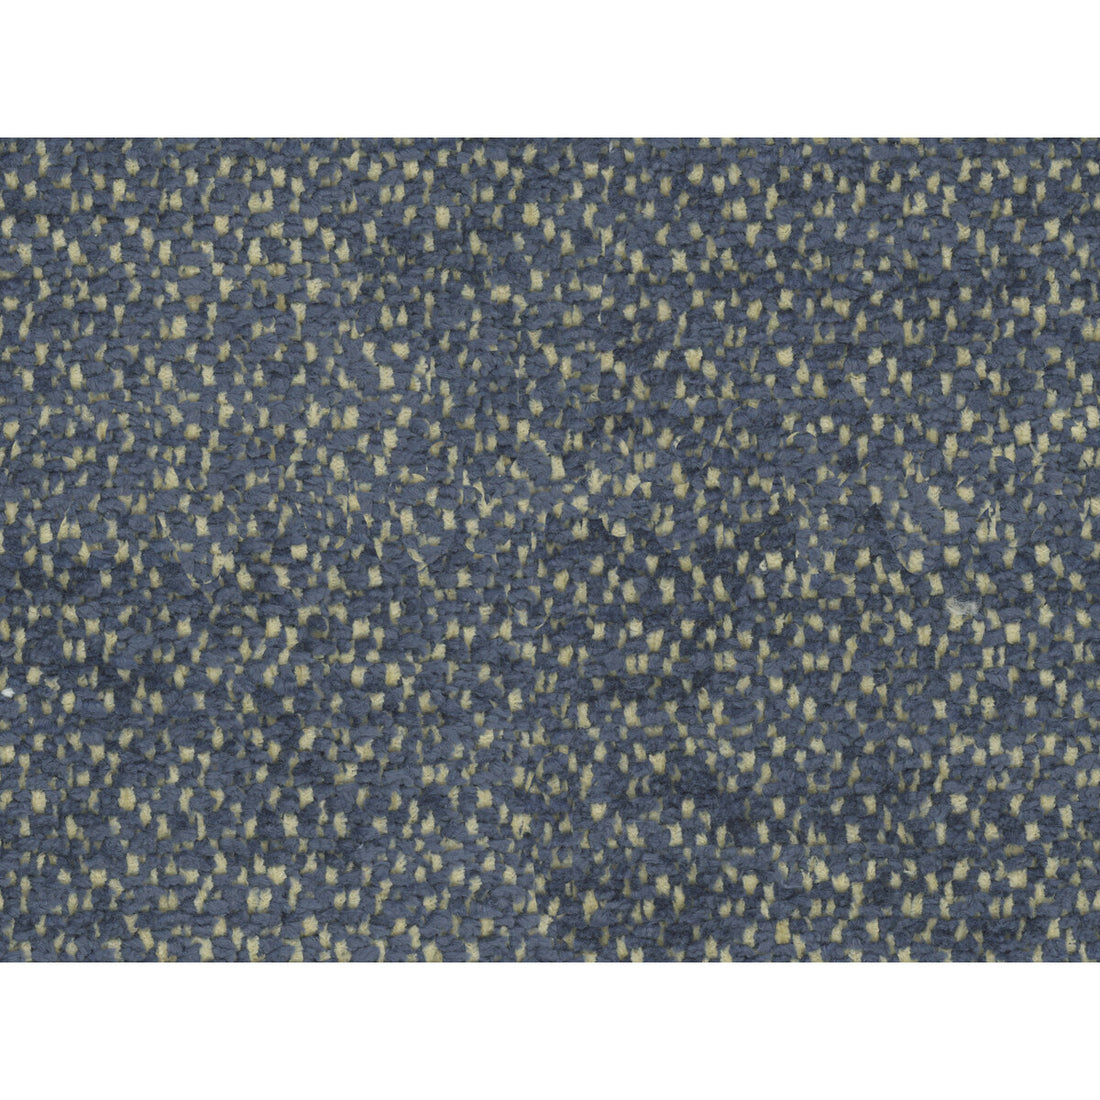 Bourget Chenille fabric in navy color - pattern 8016108.50.0 - by Brunschwig &amp; Fils in the Chambery Textures collection